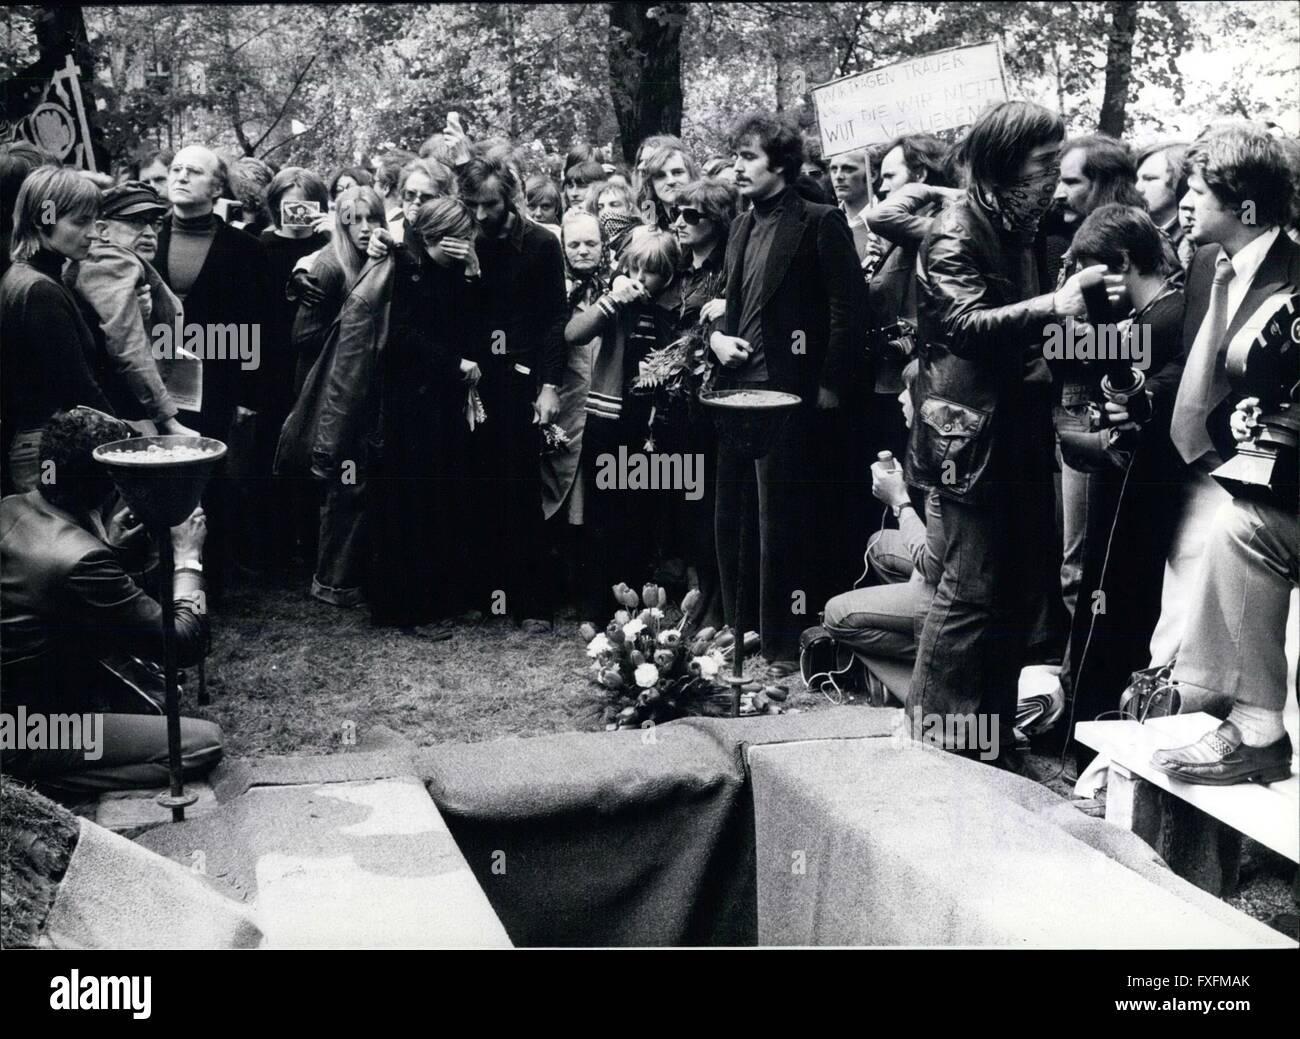 1977 - Anarchist Ulrike Meinhof buried in Berlin: Ulrike Meinhof (Ulrike Meinhof), leading member of the German anarchist ''Baader/Meinhof'' group, who committed suicide by hanging herself with a towel in her cell of the Stuttgart-Stammheim prison on May 9th, 1976 was buried in Berlin on May 15th. About 4000 people accompanied her on her last journey. After the funeral there took place a demonstration by 45000 persons through the streets of Berlin. Photo shows the funeral of Ulrike Meinhof at the Holy Trinity Cemetery in Berlin. In the left the step-daughter of Ulrike Meinhof, 3. From left her Stock Photo